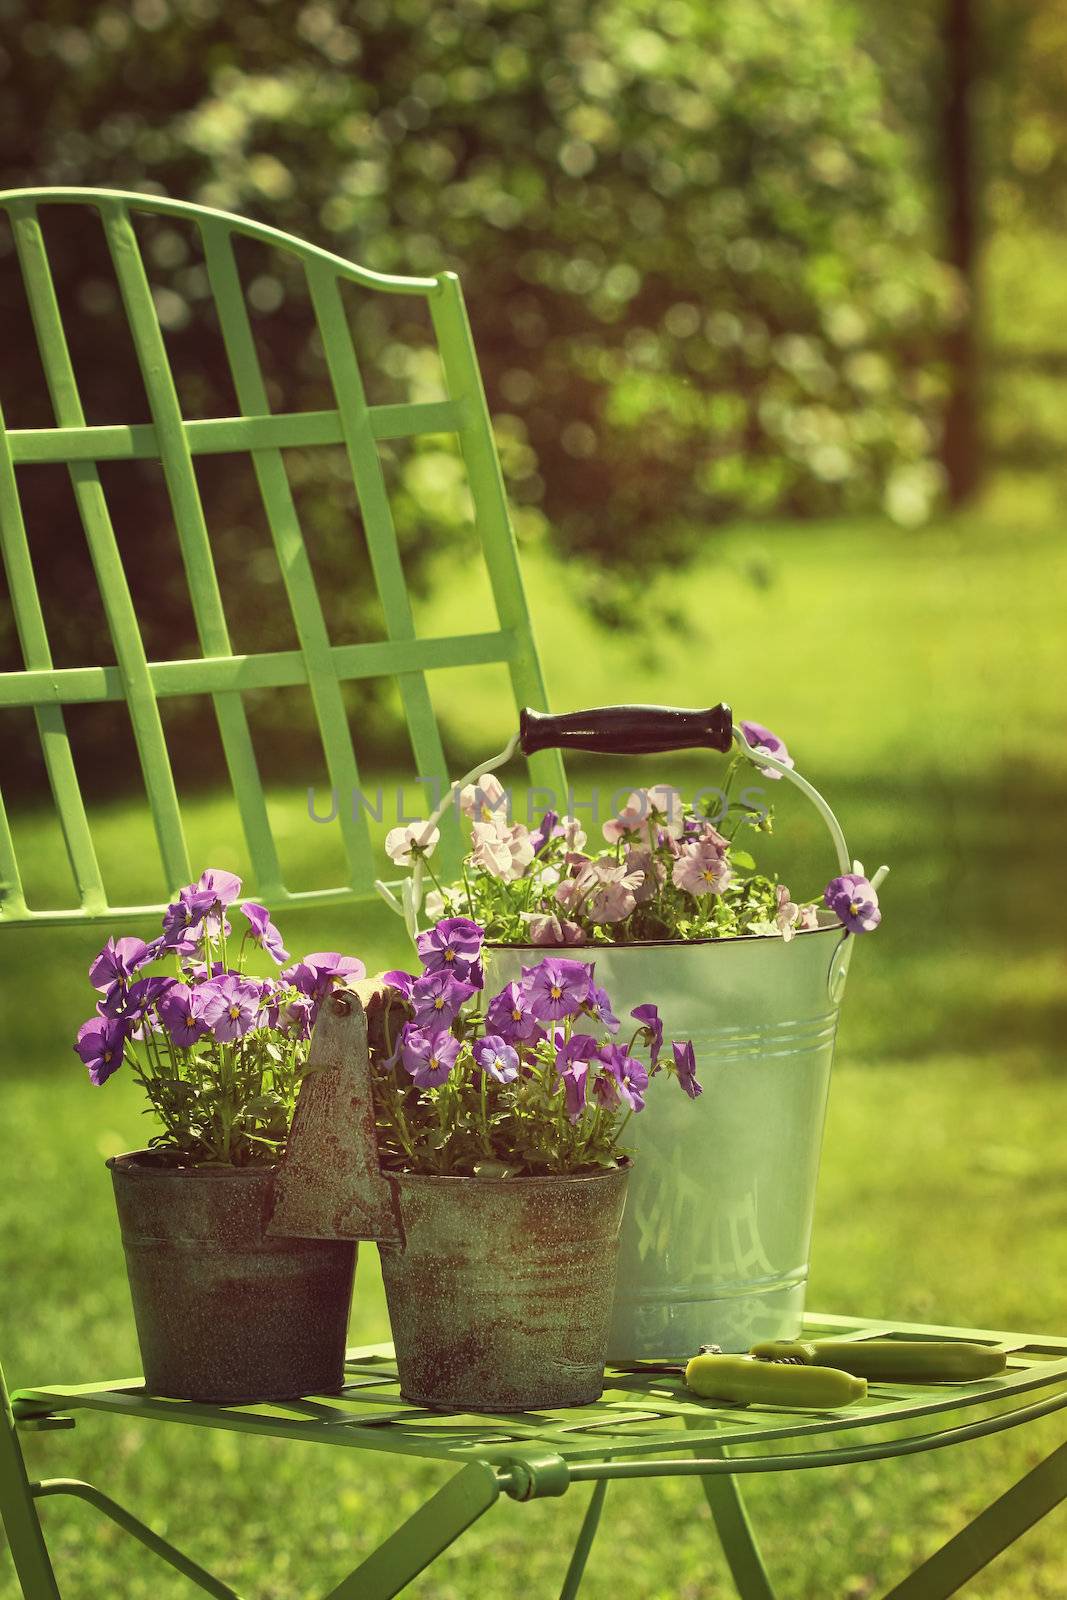 Spring violets in pots on garden chair by Sandralise